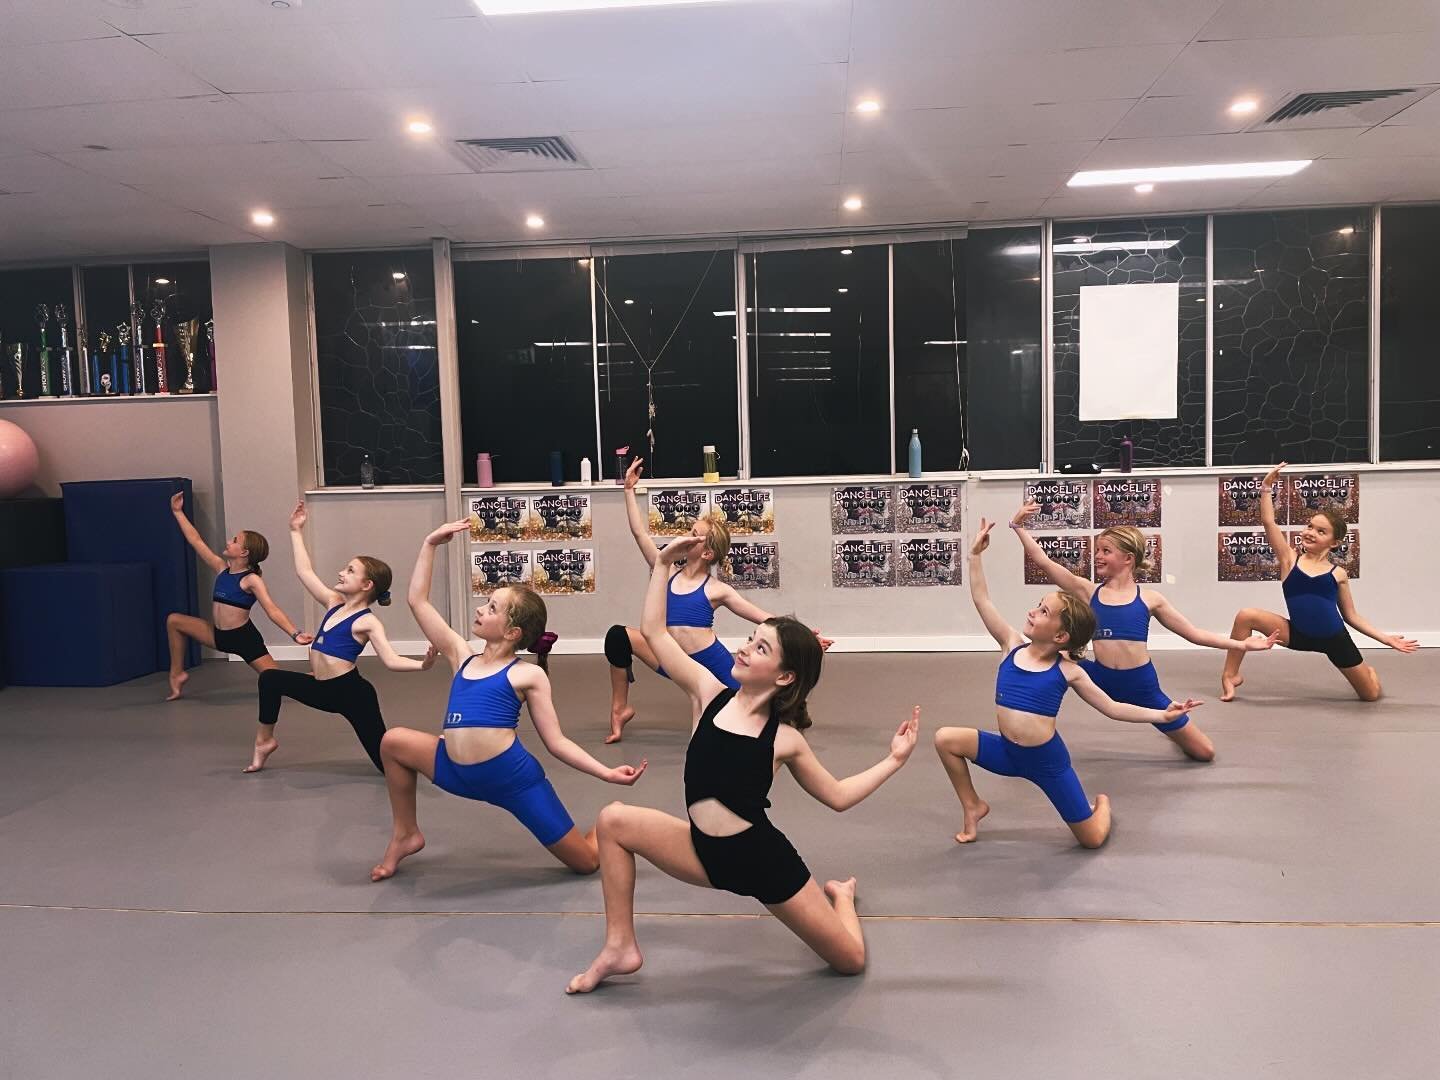 Term 2 is looking 🔥 Our MADancers are busy this term working on RAD Examinations and Competitions! Keep working hard girls 🤩💙 #madancers #charlysangel #goMAD #MADteam #passion #dance #strength #power #unity #lyrical #contemporary #hope #teamworkma